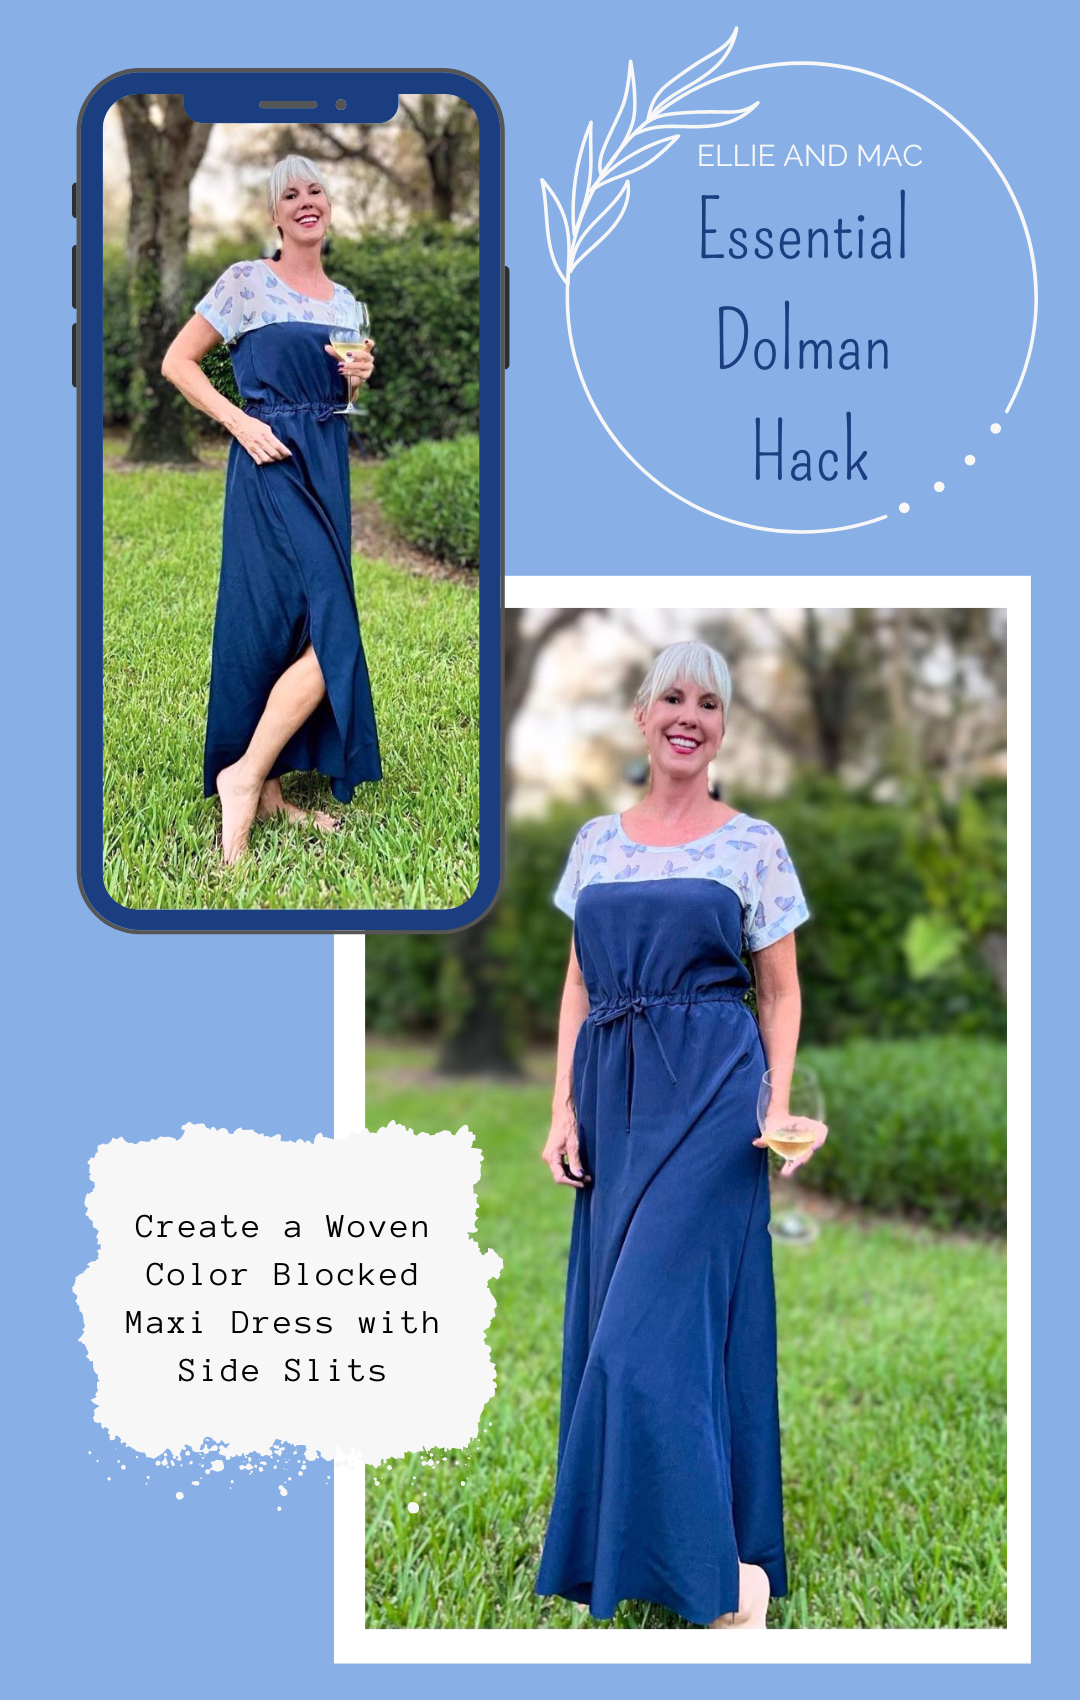 Essential Dolman Hack - Create a Woven Color Blocked Maxi Dress with Side Slits